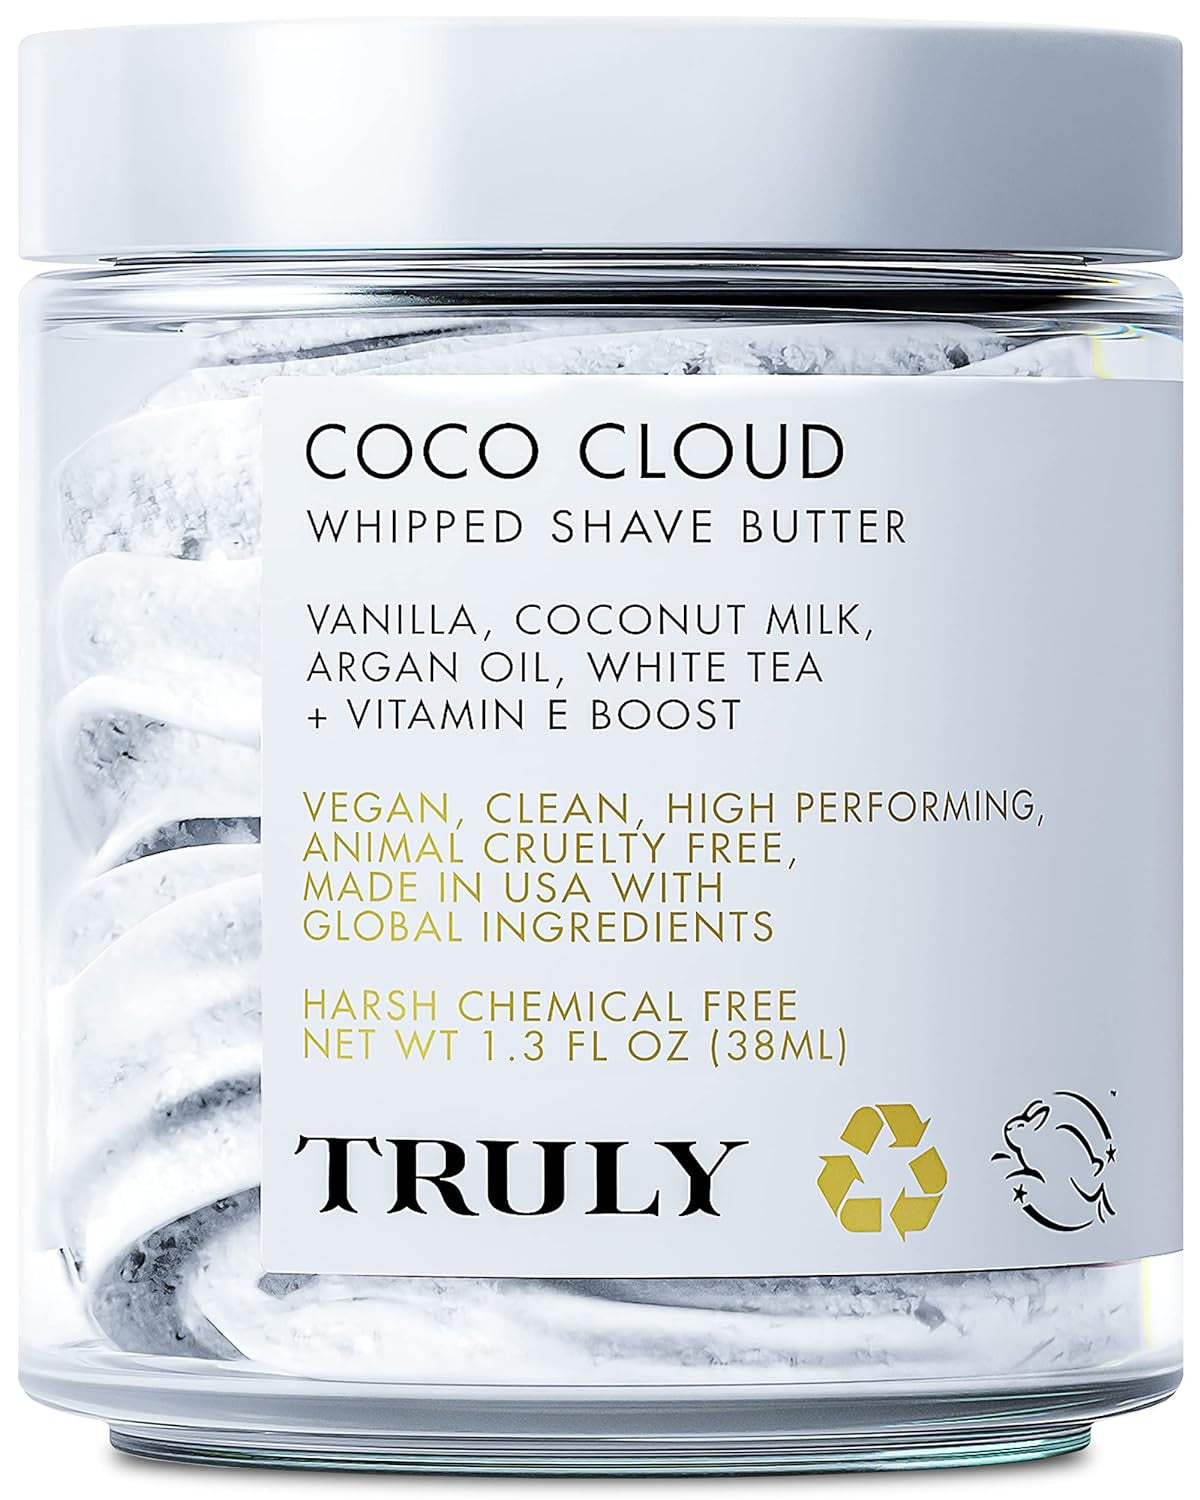 "Truly Beauty Happy Hairless Shave Butter - Women's Natural Shaving Cream with Coconut Oil and Nourishing Ingredients - 1.3 Fl Oz"